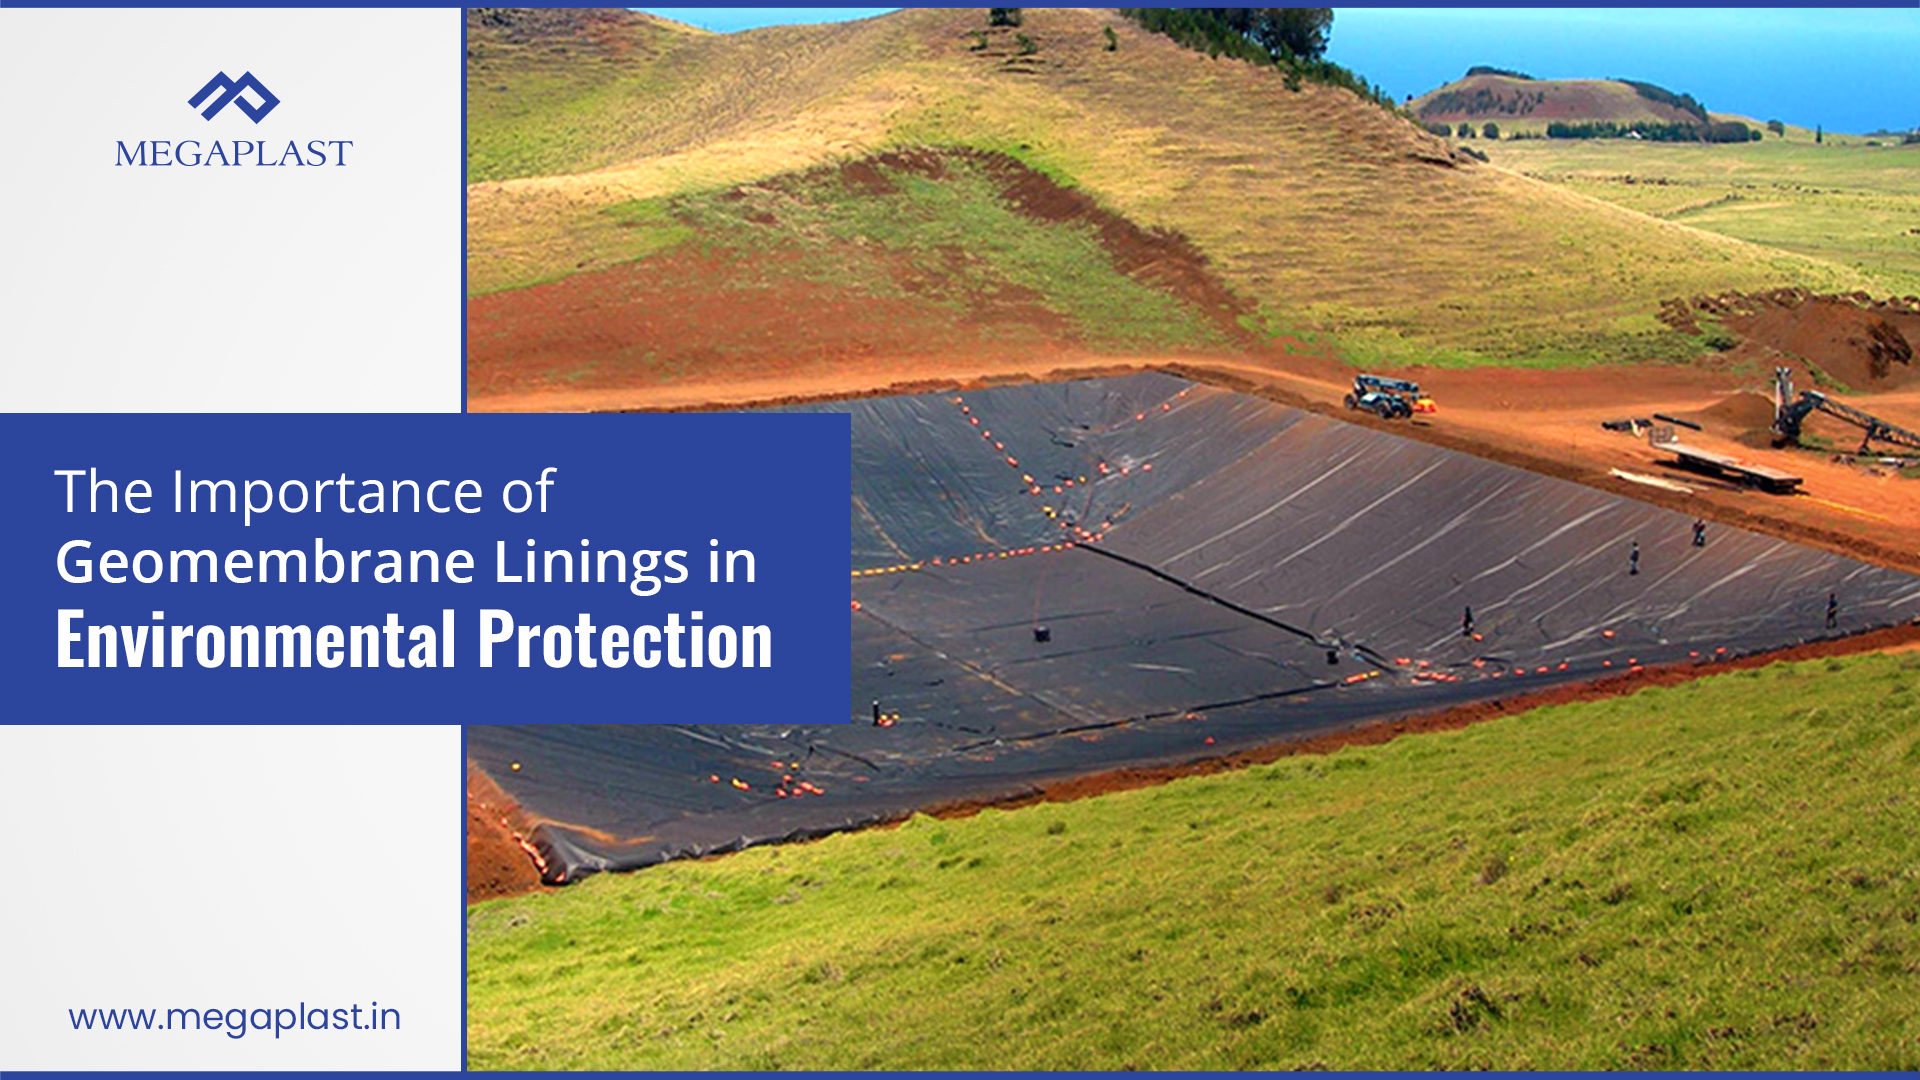  The Importance of Geomembrane Linings in Environmental Protection 